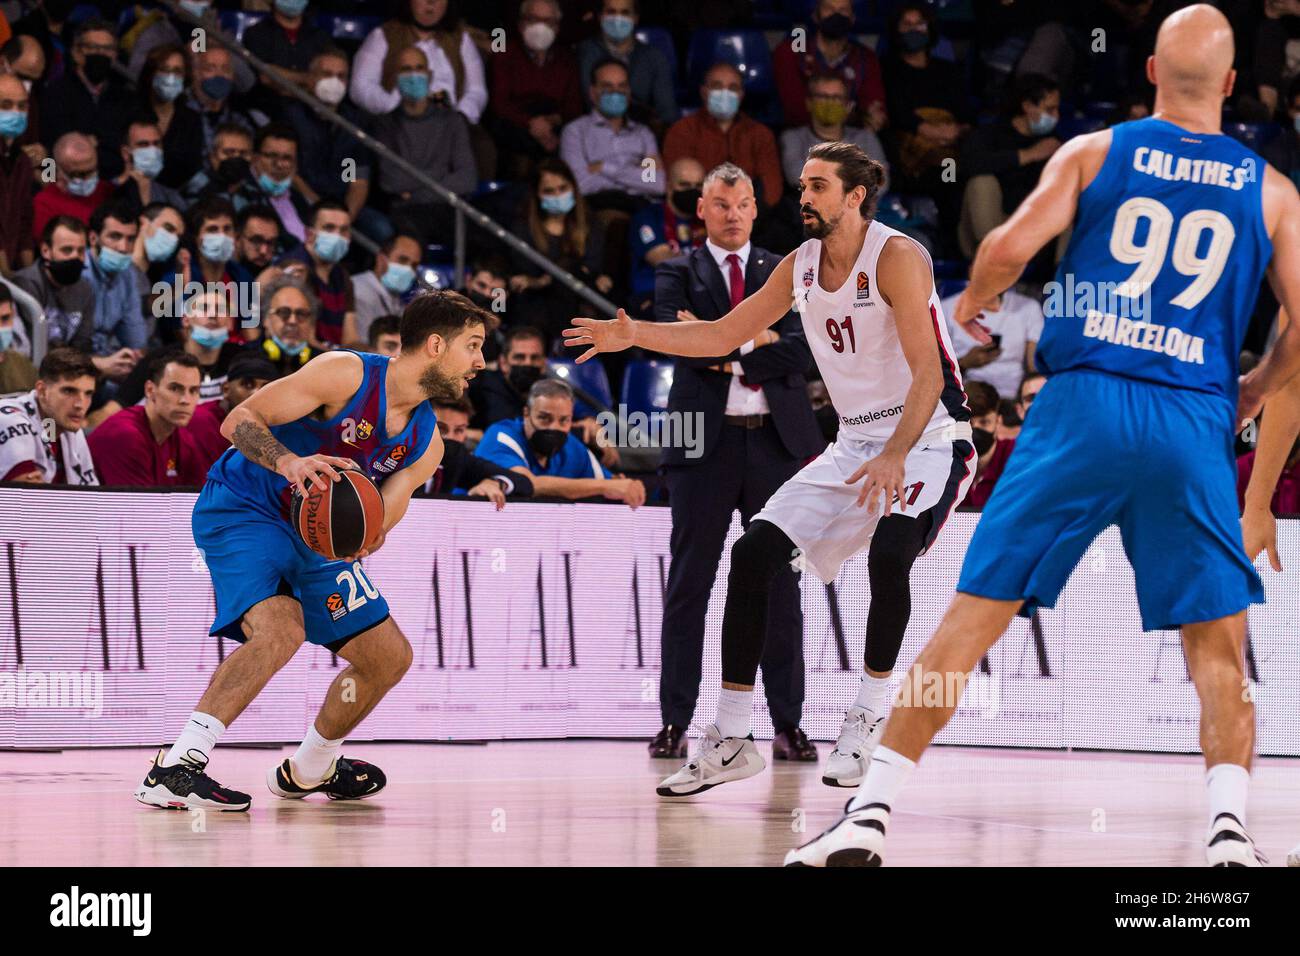 Nico Laprovittola of FC Barcelona in action against Alexey Shved of CSKA Moscow during the Turkish Airlines EuroLeague Basketball match between FC Barcelona and CSKA Moscow on November 17, 2021 at Palau Blaugrana in Barcelona, Spain - Photo: Javier Borrego/DPPI/LiveMedia Stock Photo